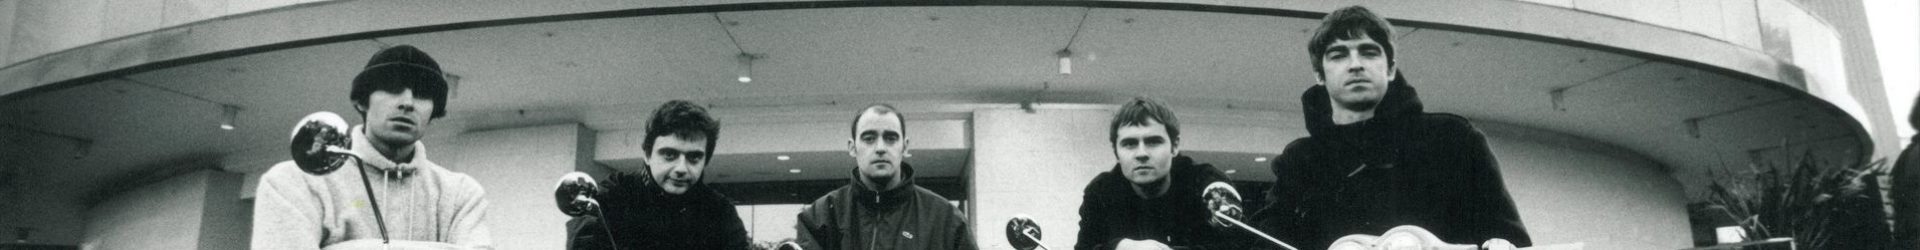 Bonehead talks about Liam Gallagher and John Squire’s joint album